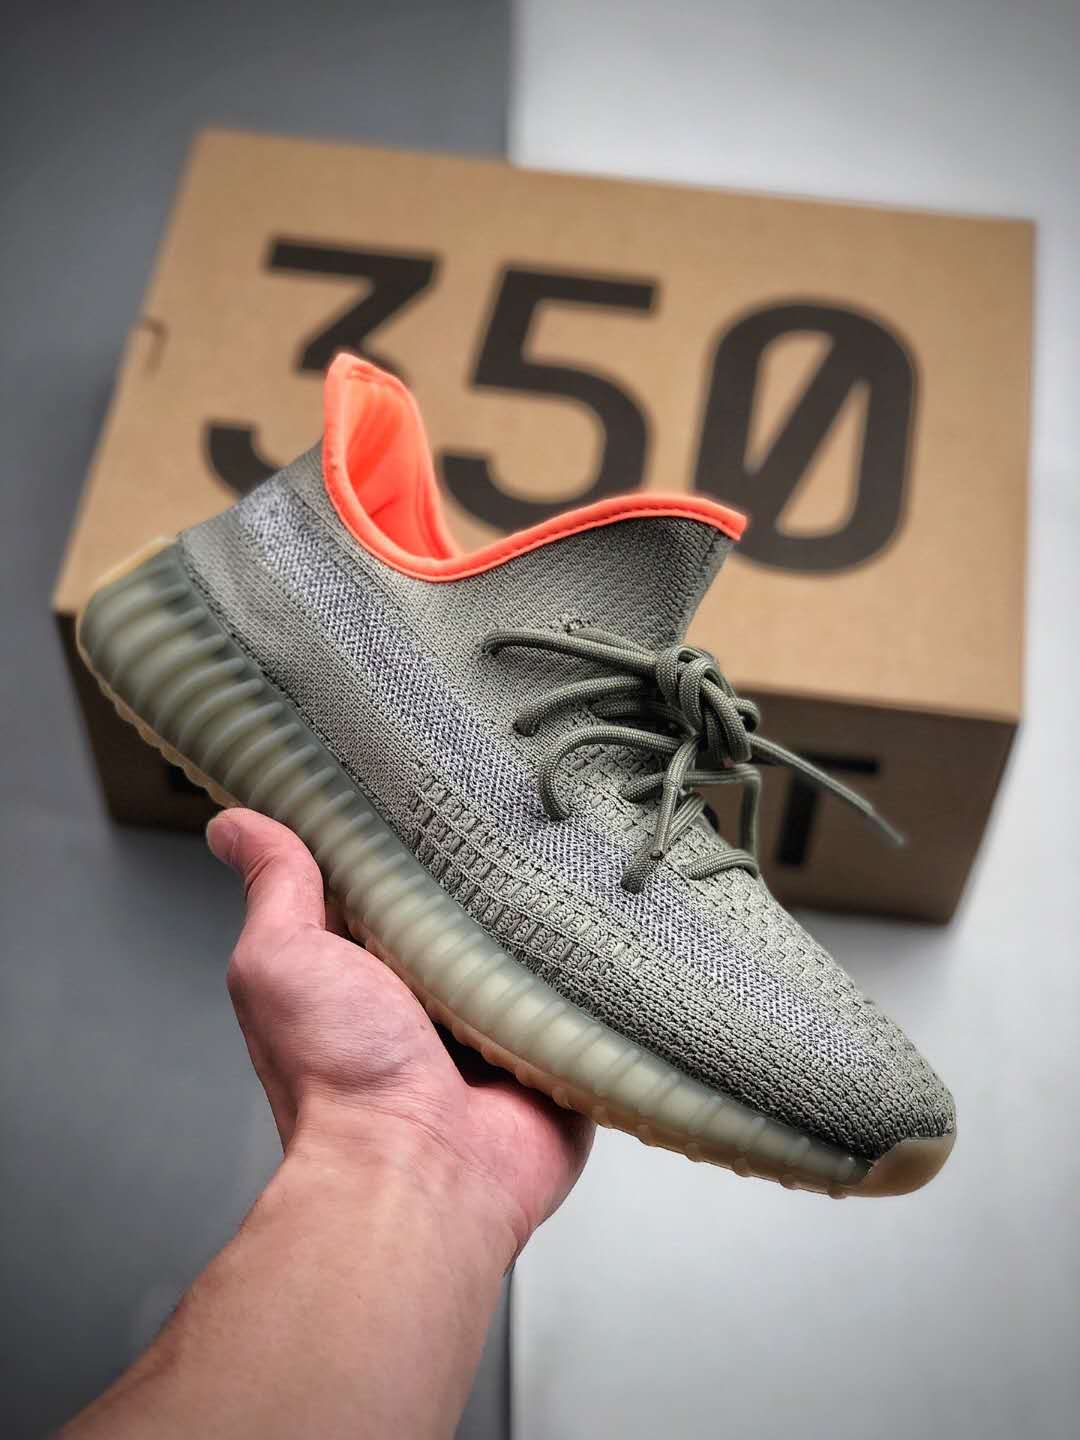 Adidas Yeezy Boost 350 V2 'Desert Sage' FX9035 - Shop Now at Great Prices!